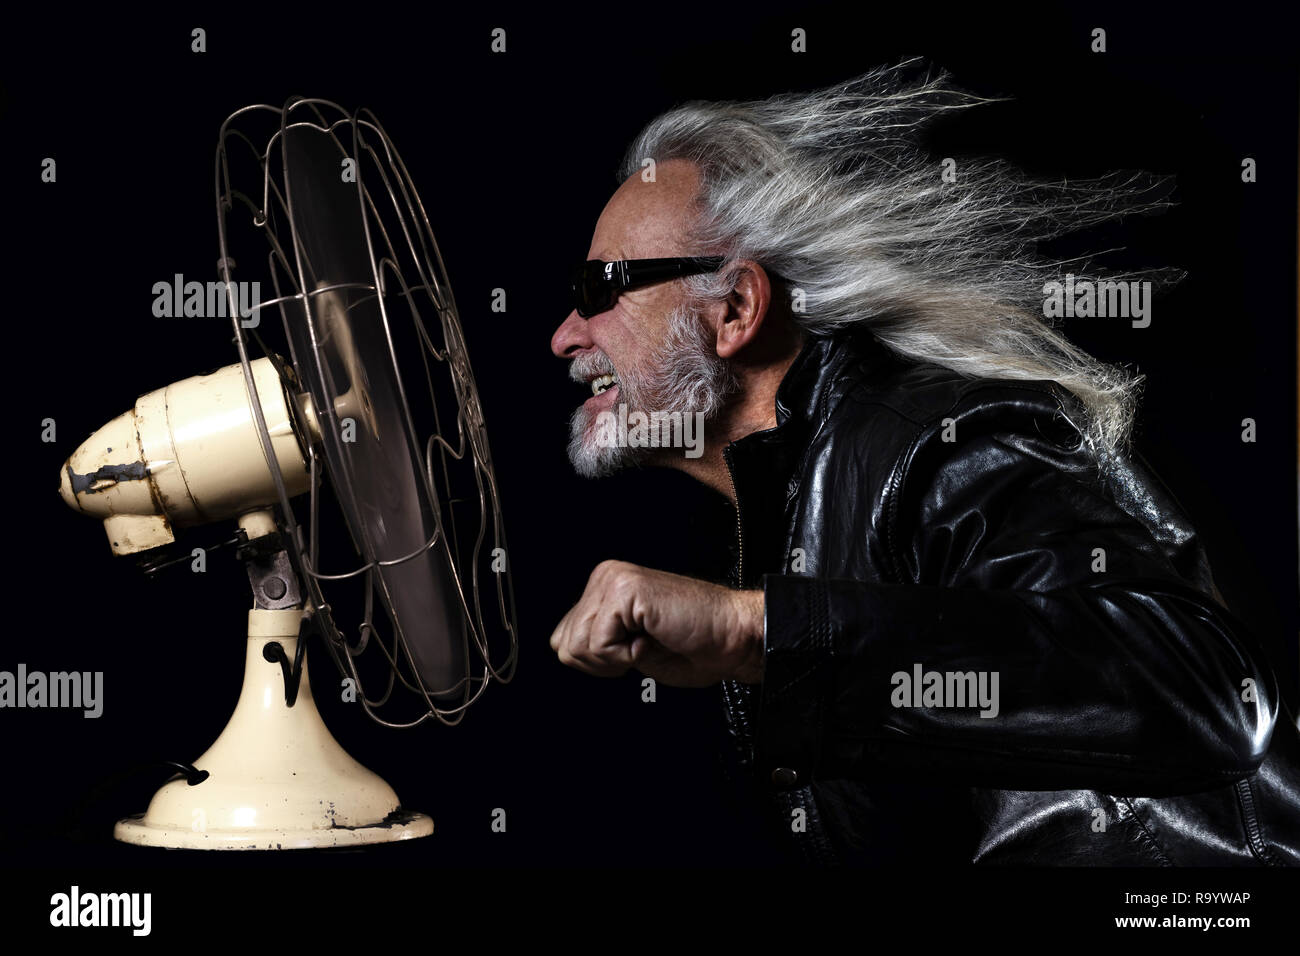 bikers dream. Long-haired man simulates a motorcycle ride in front of a fan. Stock Photo